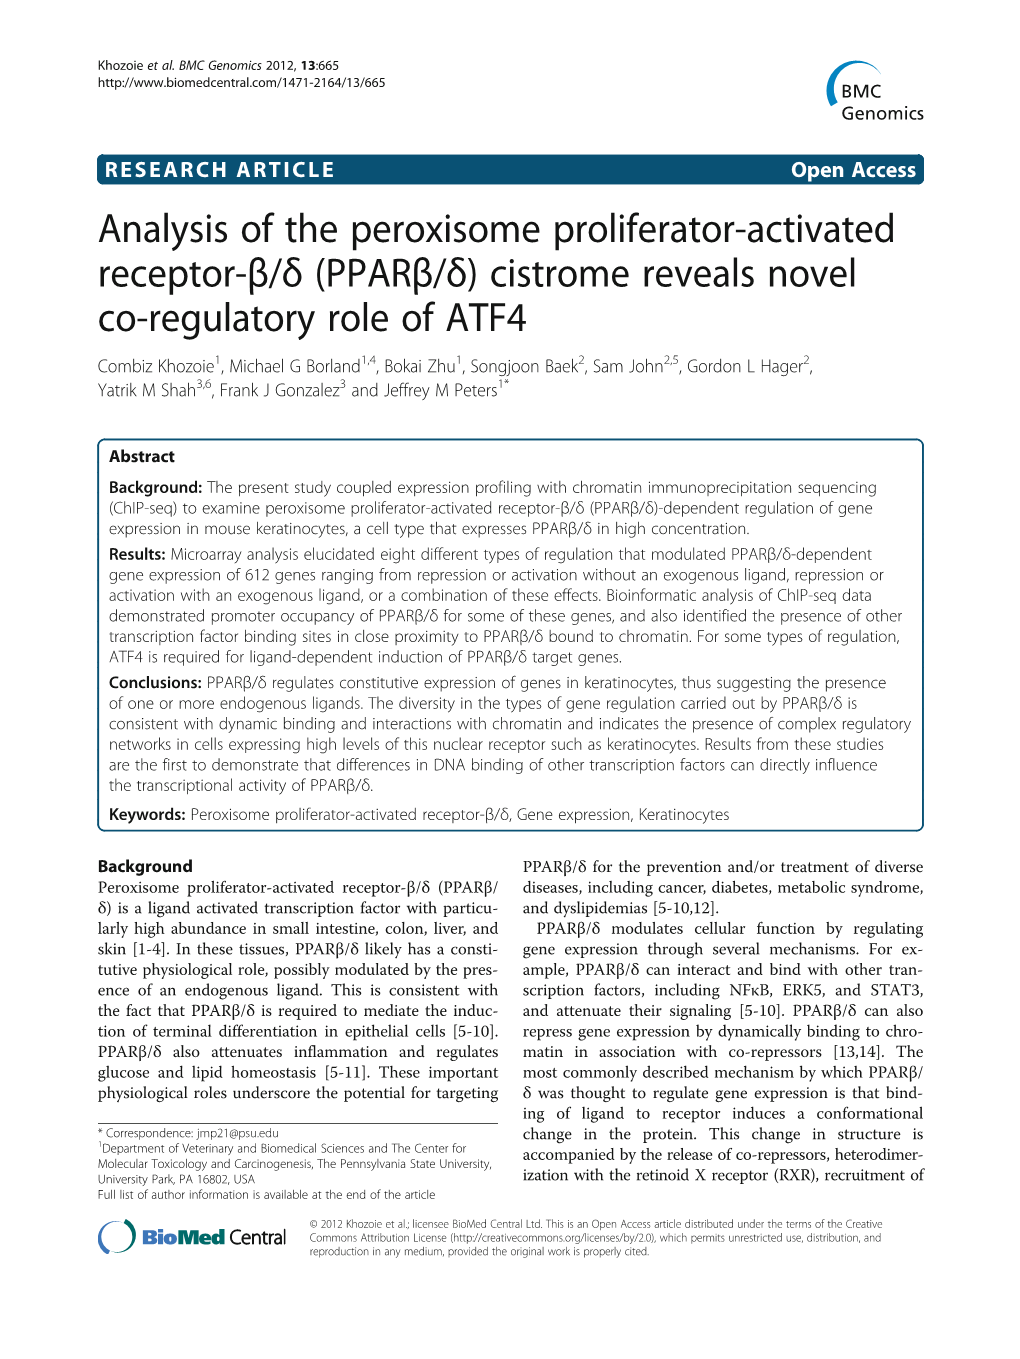 Analysis of the Peroxisome Proliferator-Activated Receptor-Β/Δ